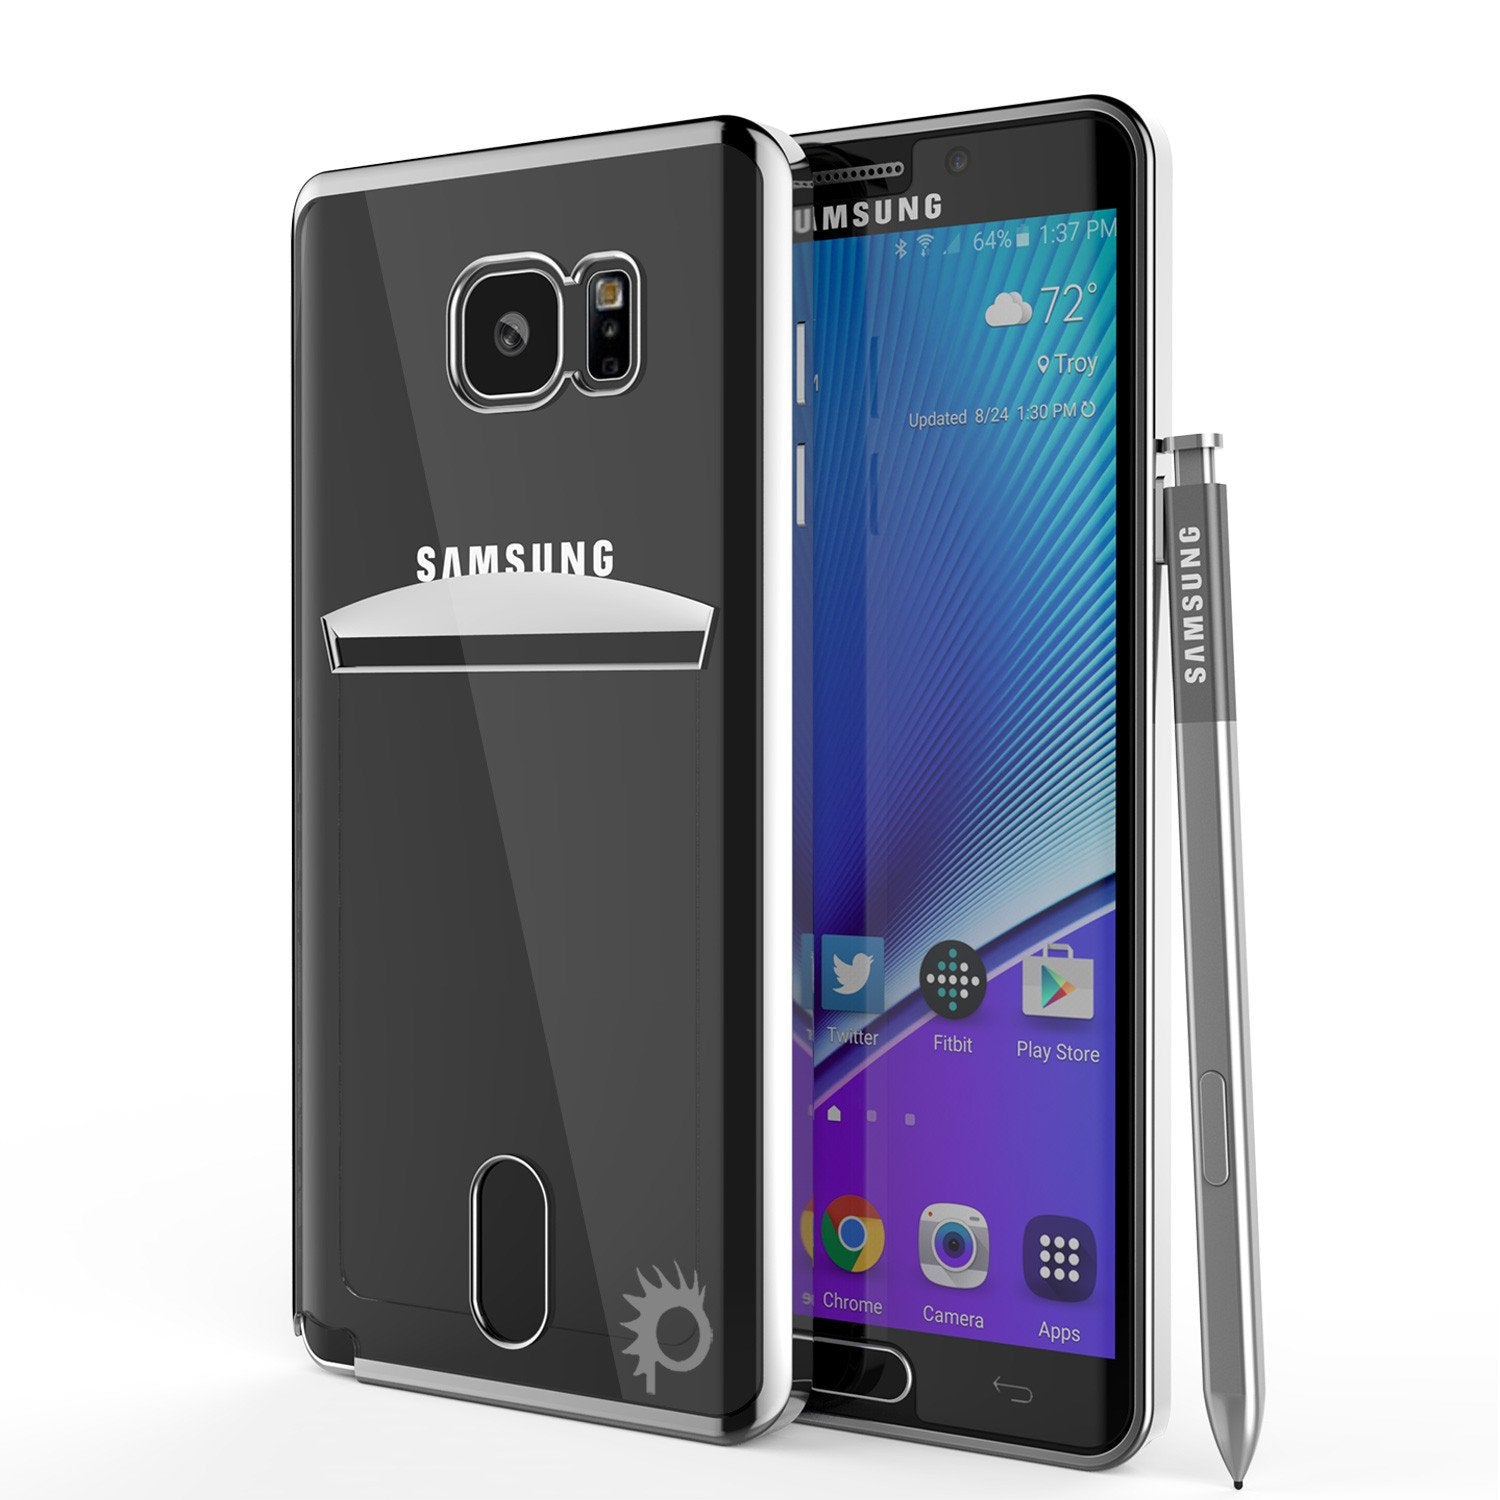 Galaxy Note 5 Case, PUNKCASE® LUCID Silver Series | Card Slot | SHIELD Screen Protector | Ultra fit - PunkCase NZ